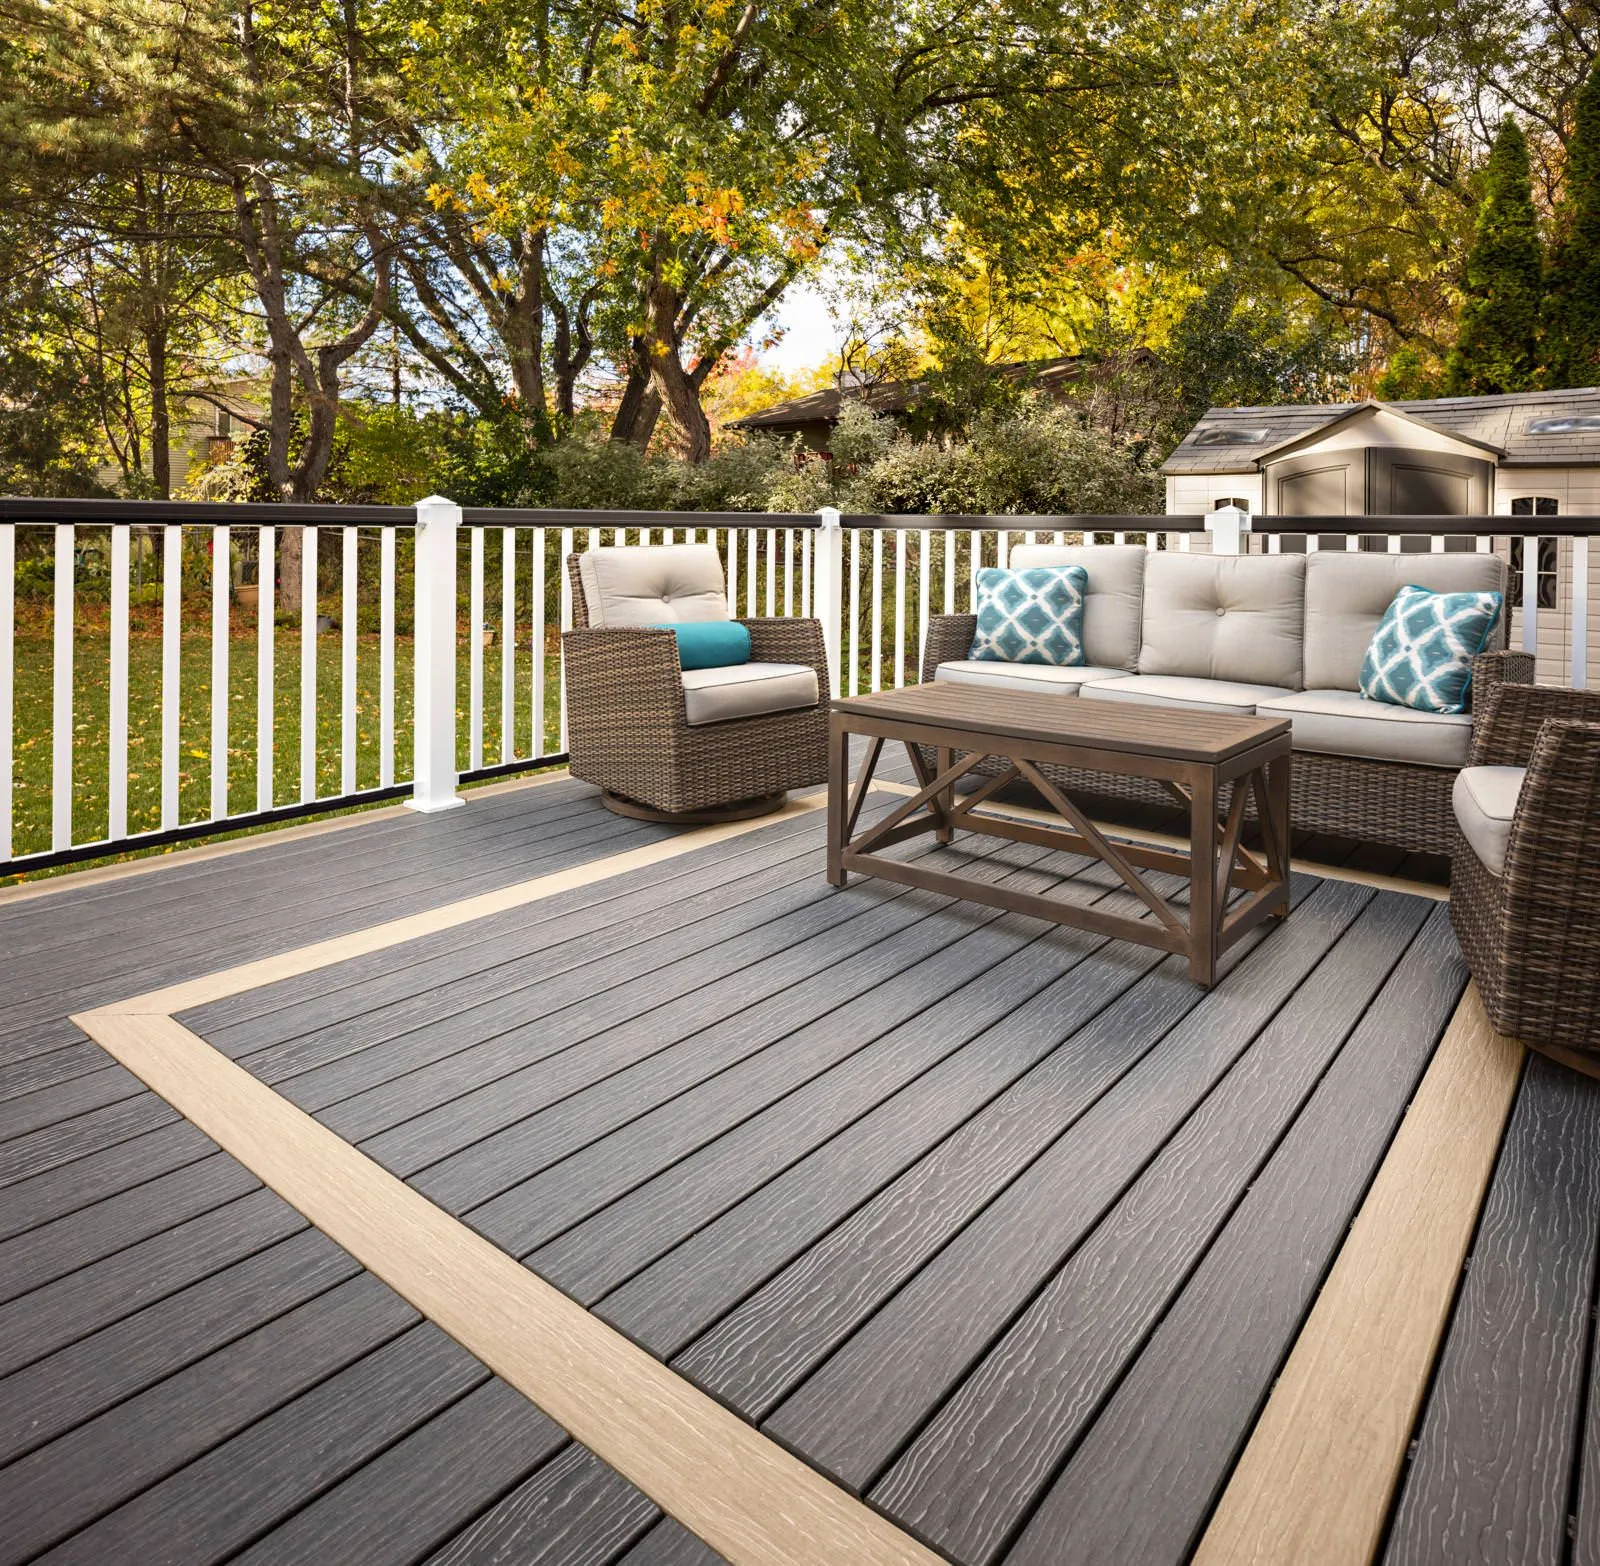 How to Clean Vinyl Decking